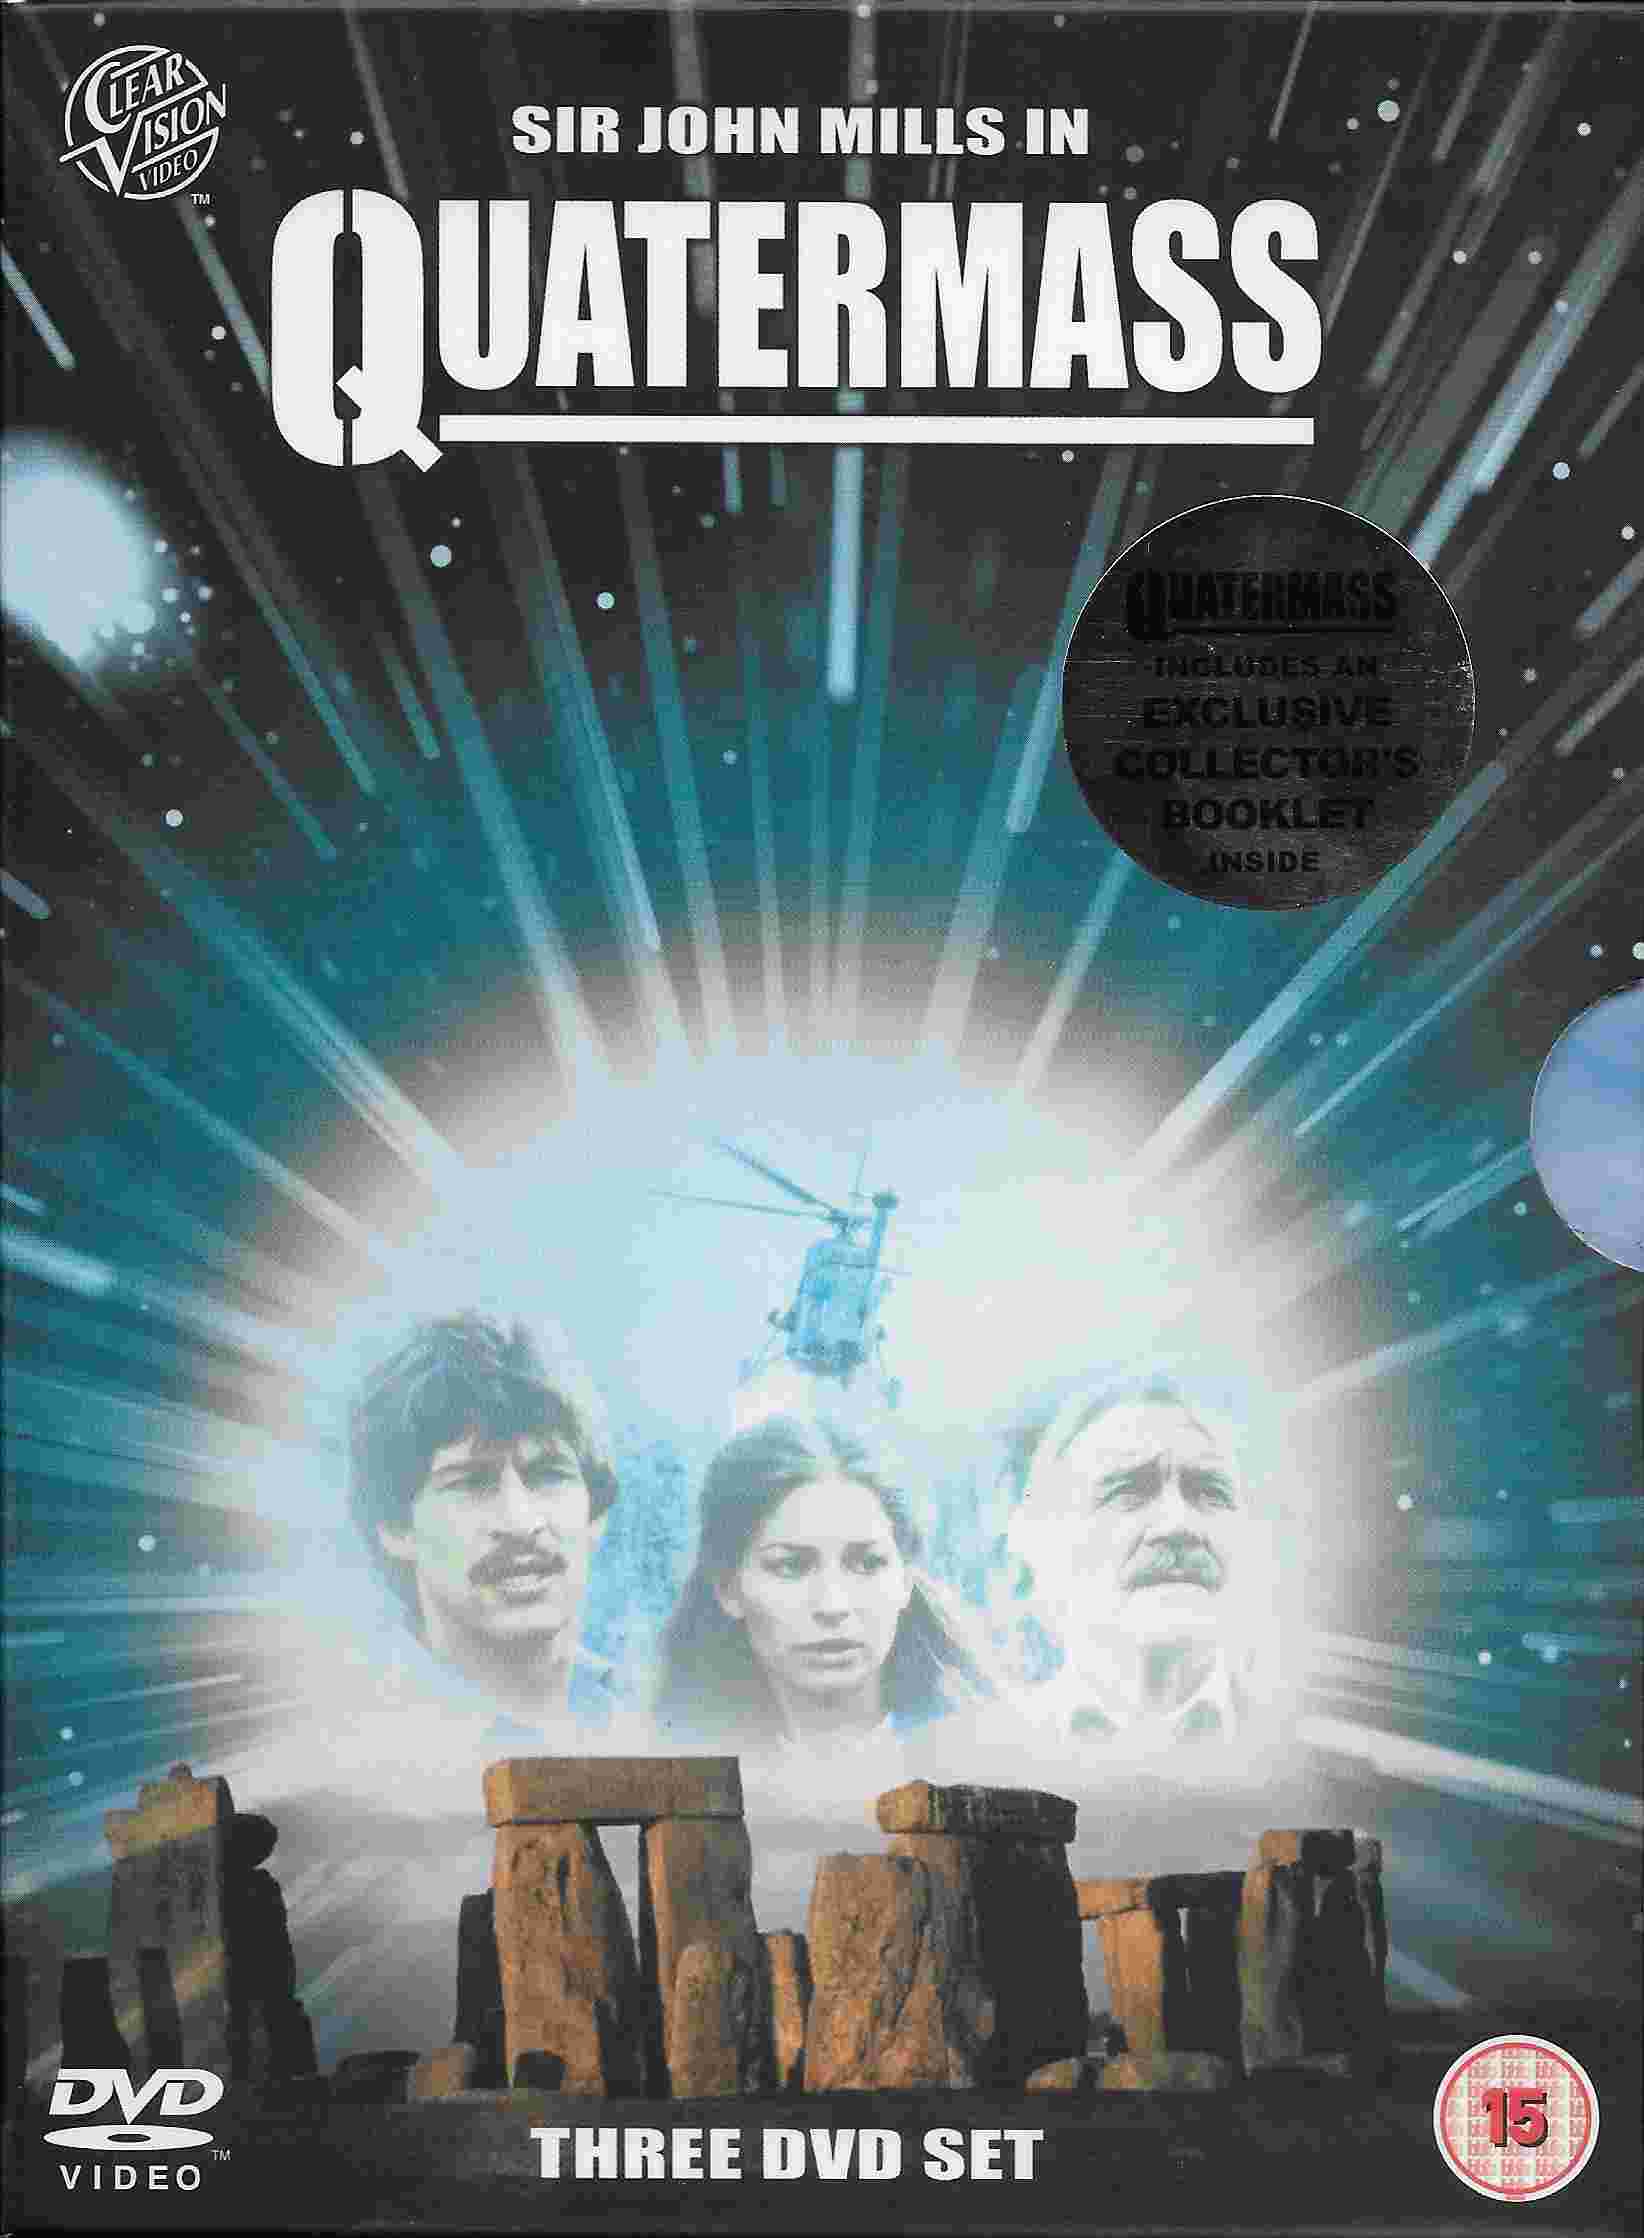 Picture of QBOXDVD 01 Quatermass by artist Nigel Kneale from ITV, Channel 4 and Channel 5 library